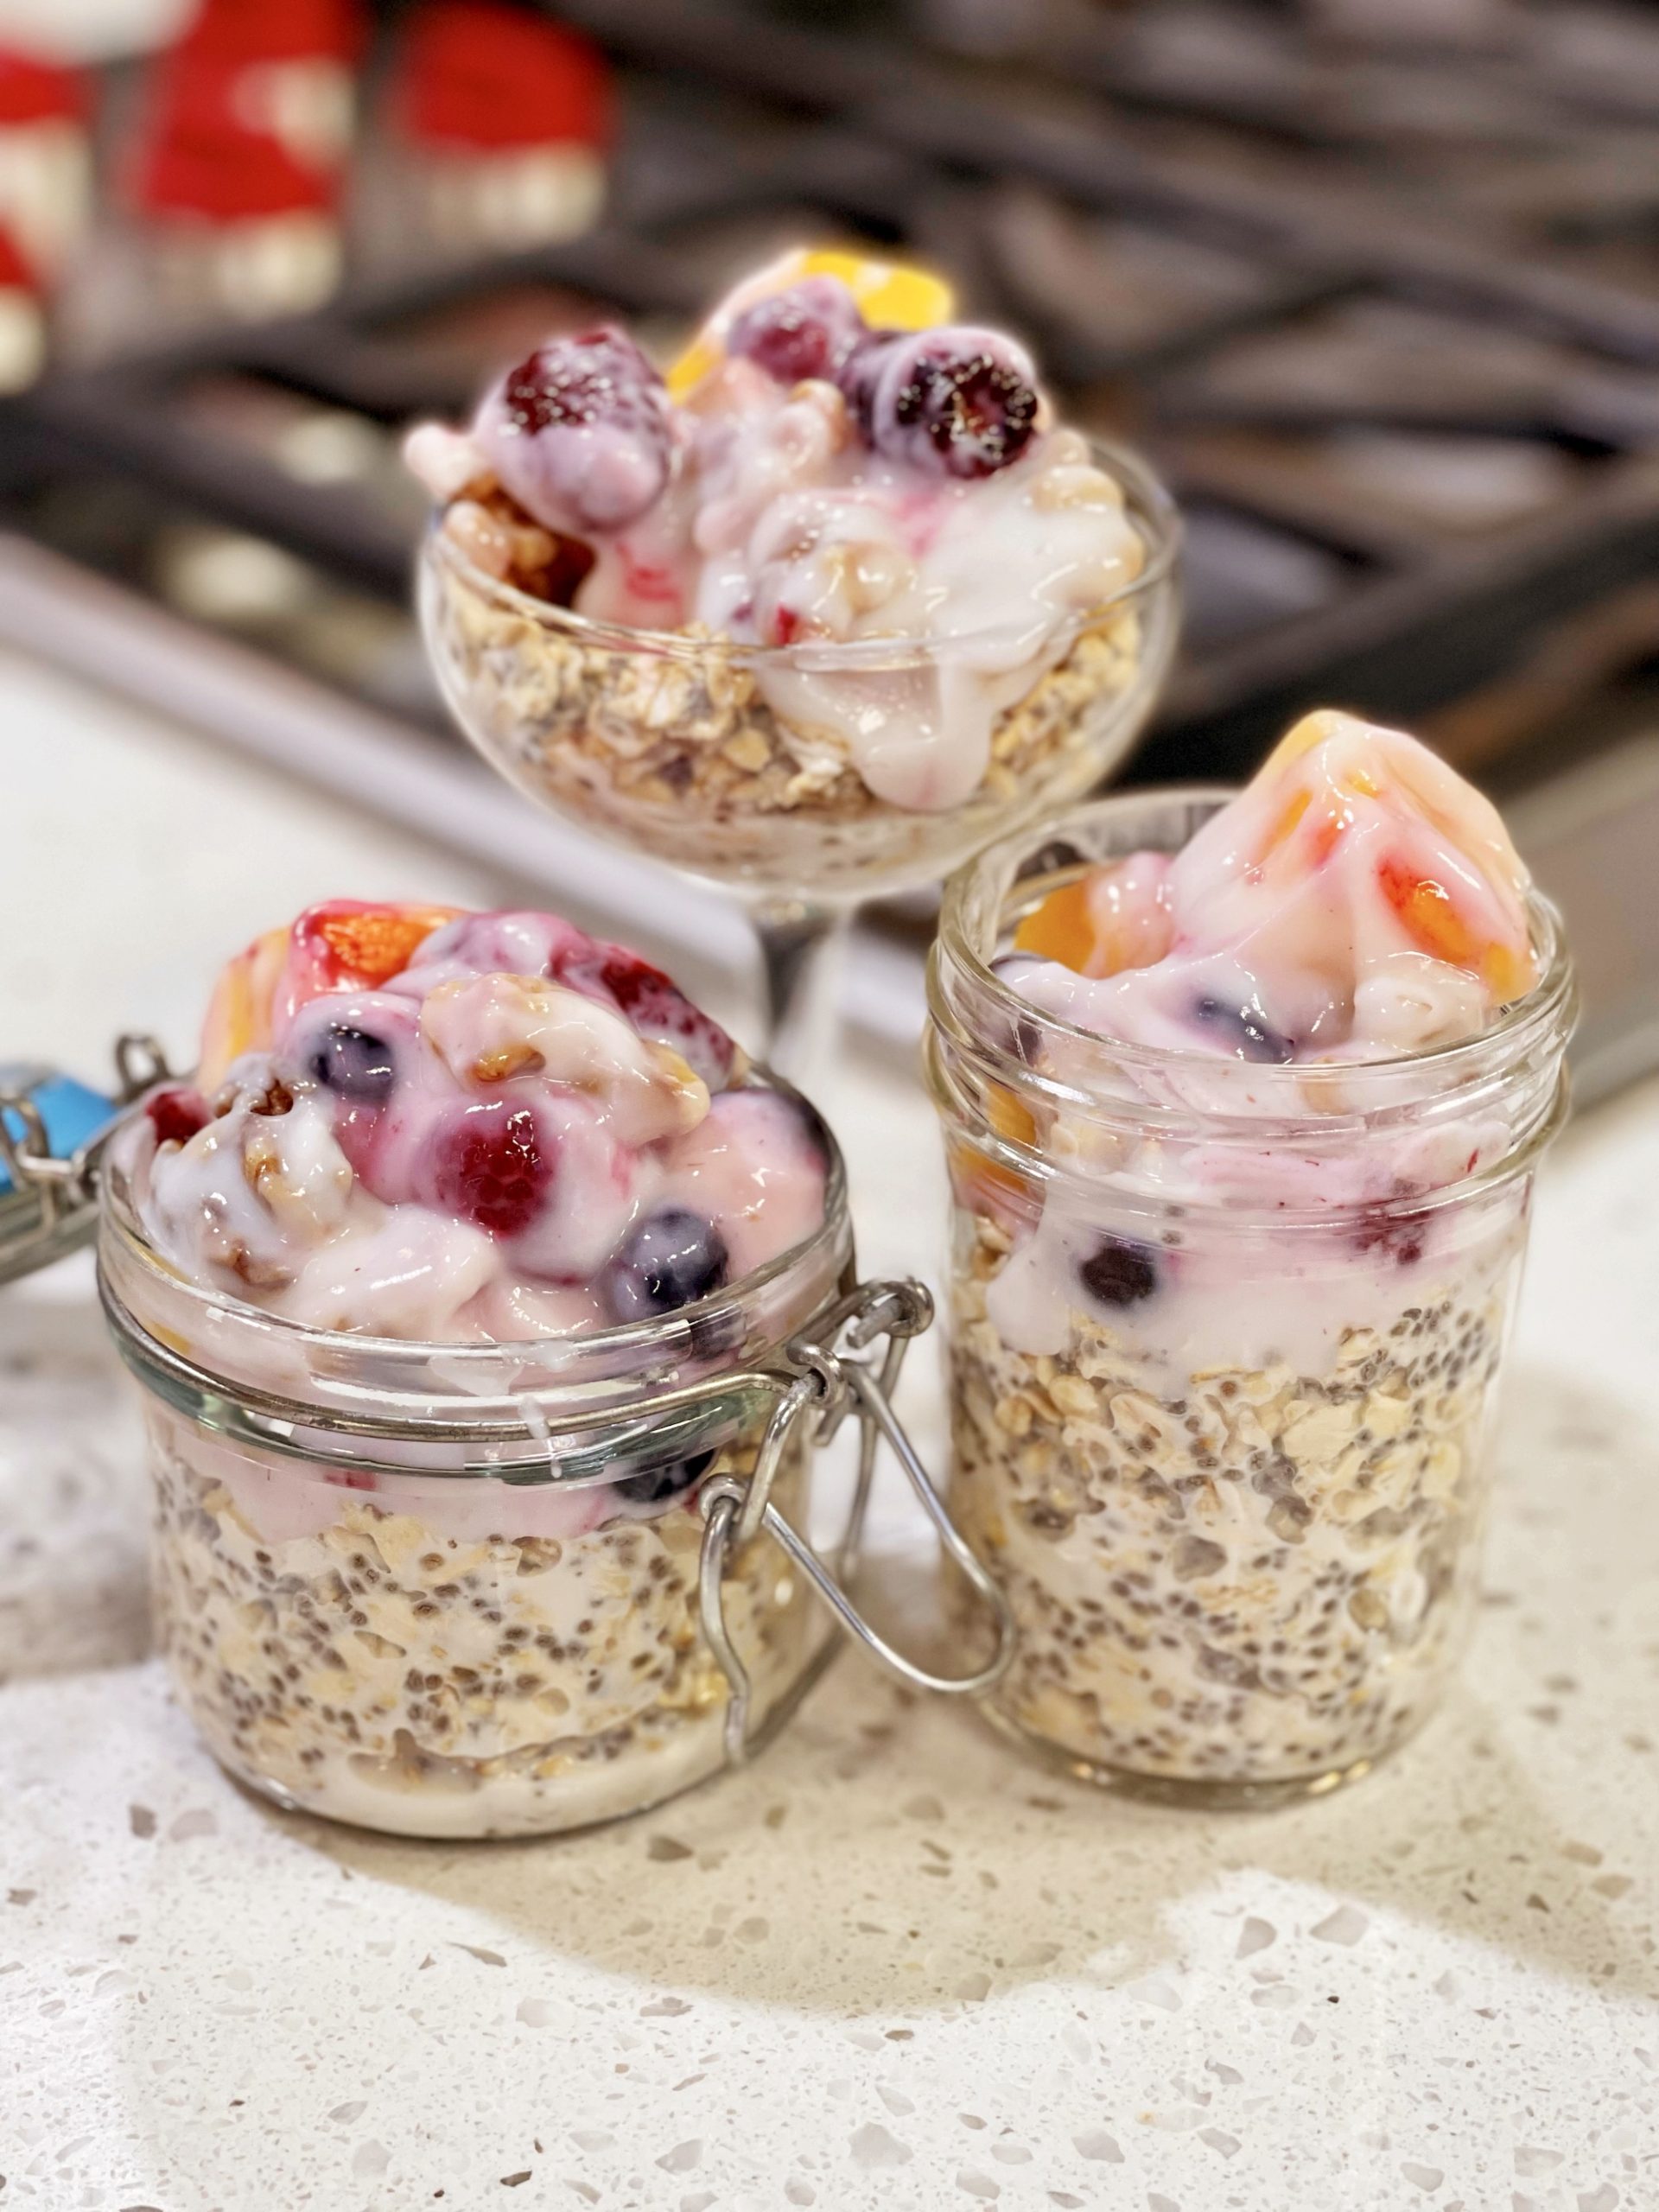 Overnight Oats - cooking with chef bryan